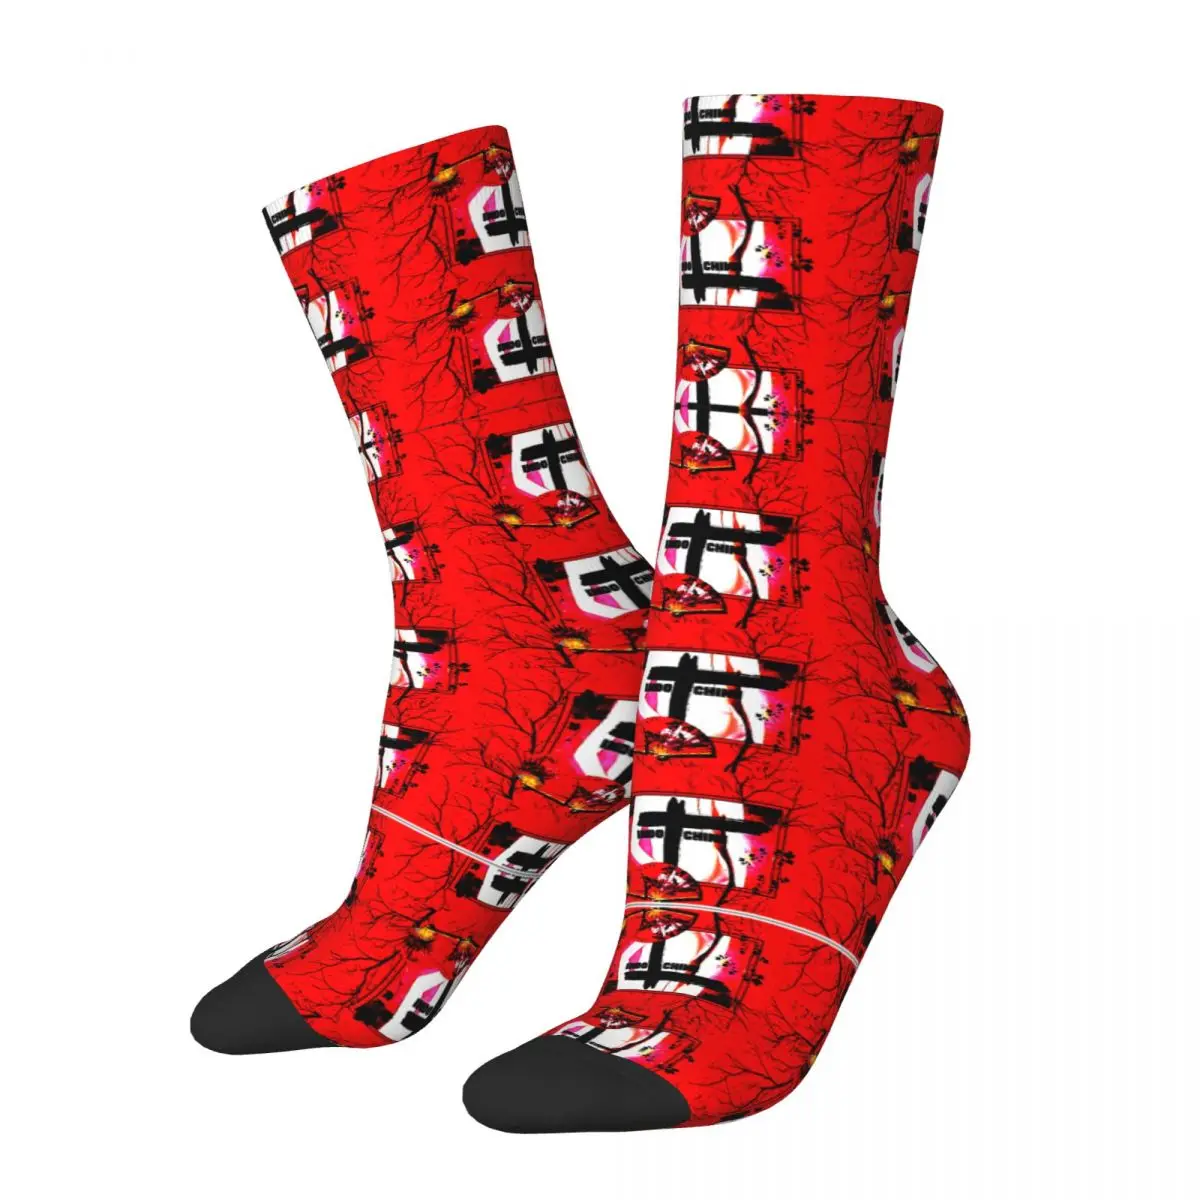 

Indochine Throw Blanket R145 Stocking Funny Graphic Better Sell Funny Joke Contrast color Compression Socks